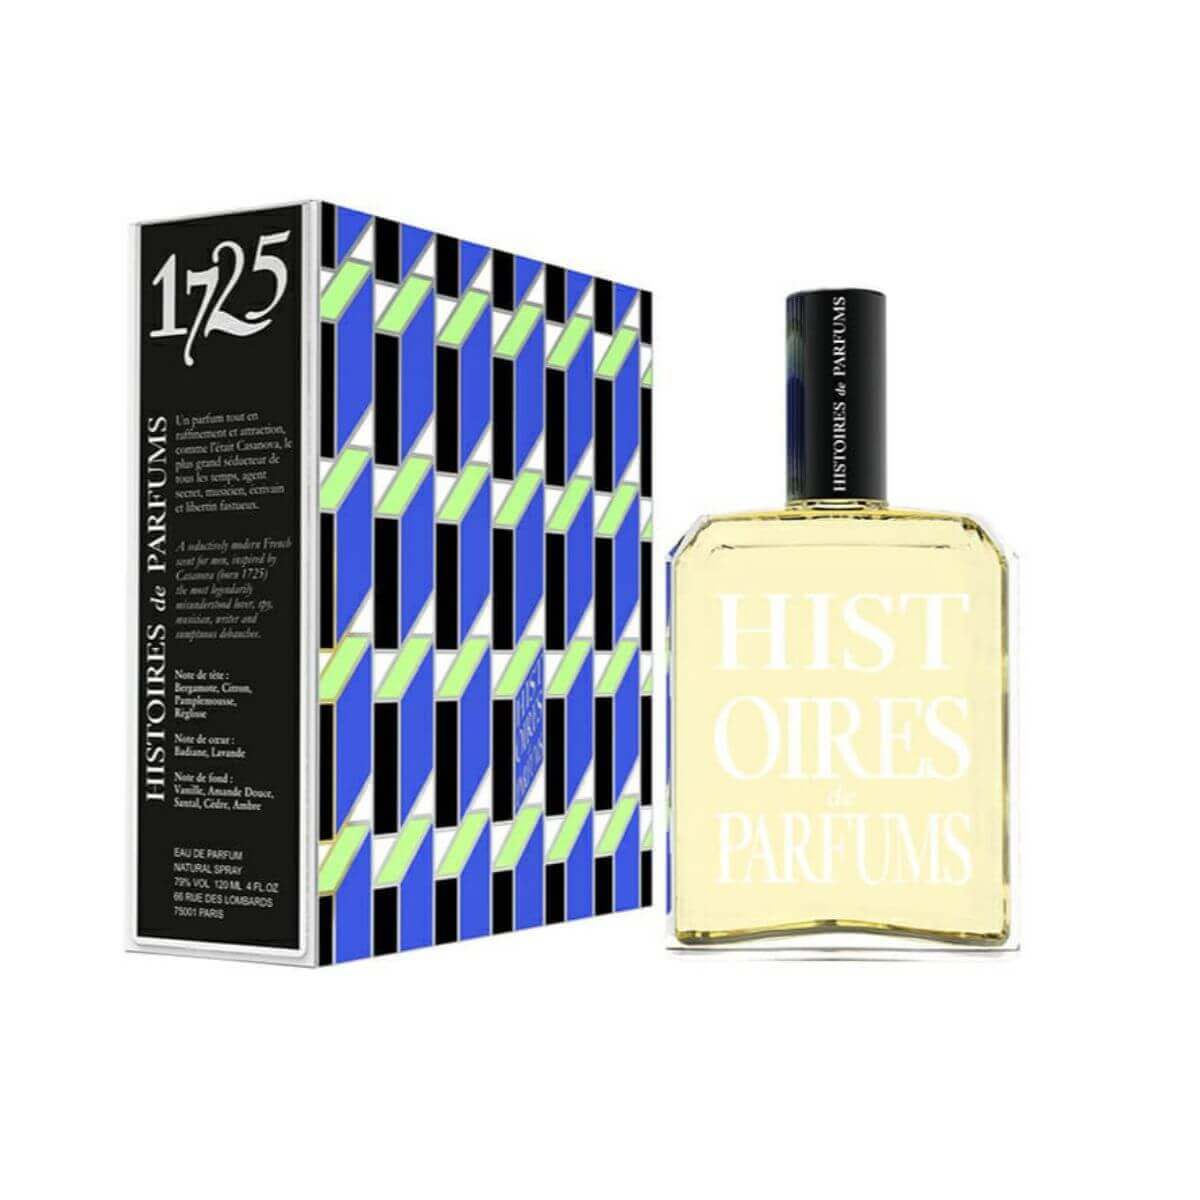 Histoires De Parfum – Casanova 1725, In The City Of Love Venice The Symbol Of Seduction Was Born: Giacomo Girolamo Casanovaa Scent For Men That Is Full With Intense Pleasure And Seduction With Its Touches Of Bergamot And Soft Lavenderyou Deserve To Be A Casanova!Top Notes: Licorice, Grapefruit, Bergamot, CitrusHeart Notes: Star Anise, LavenderBase Notes: Amber, Sandalwood, Cedar, Vanilla, Almond.